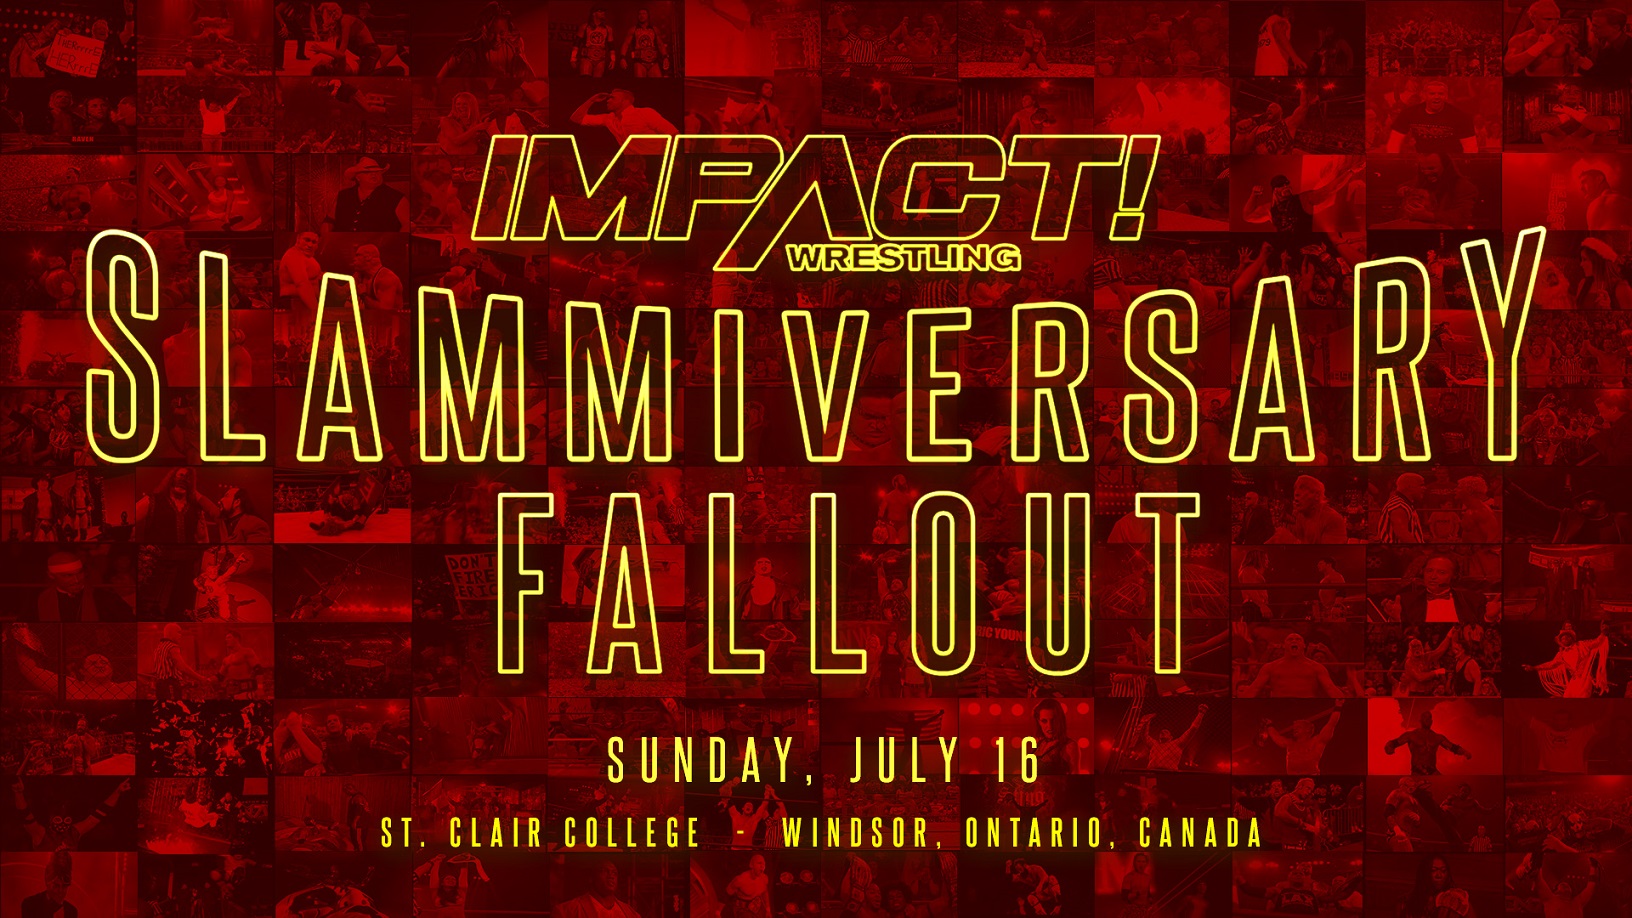 The Action Continues at Slammiversary Fallout July 16th in Windsor, Ontario